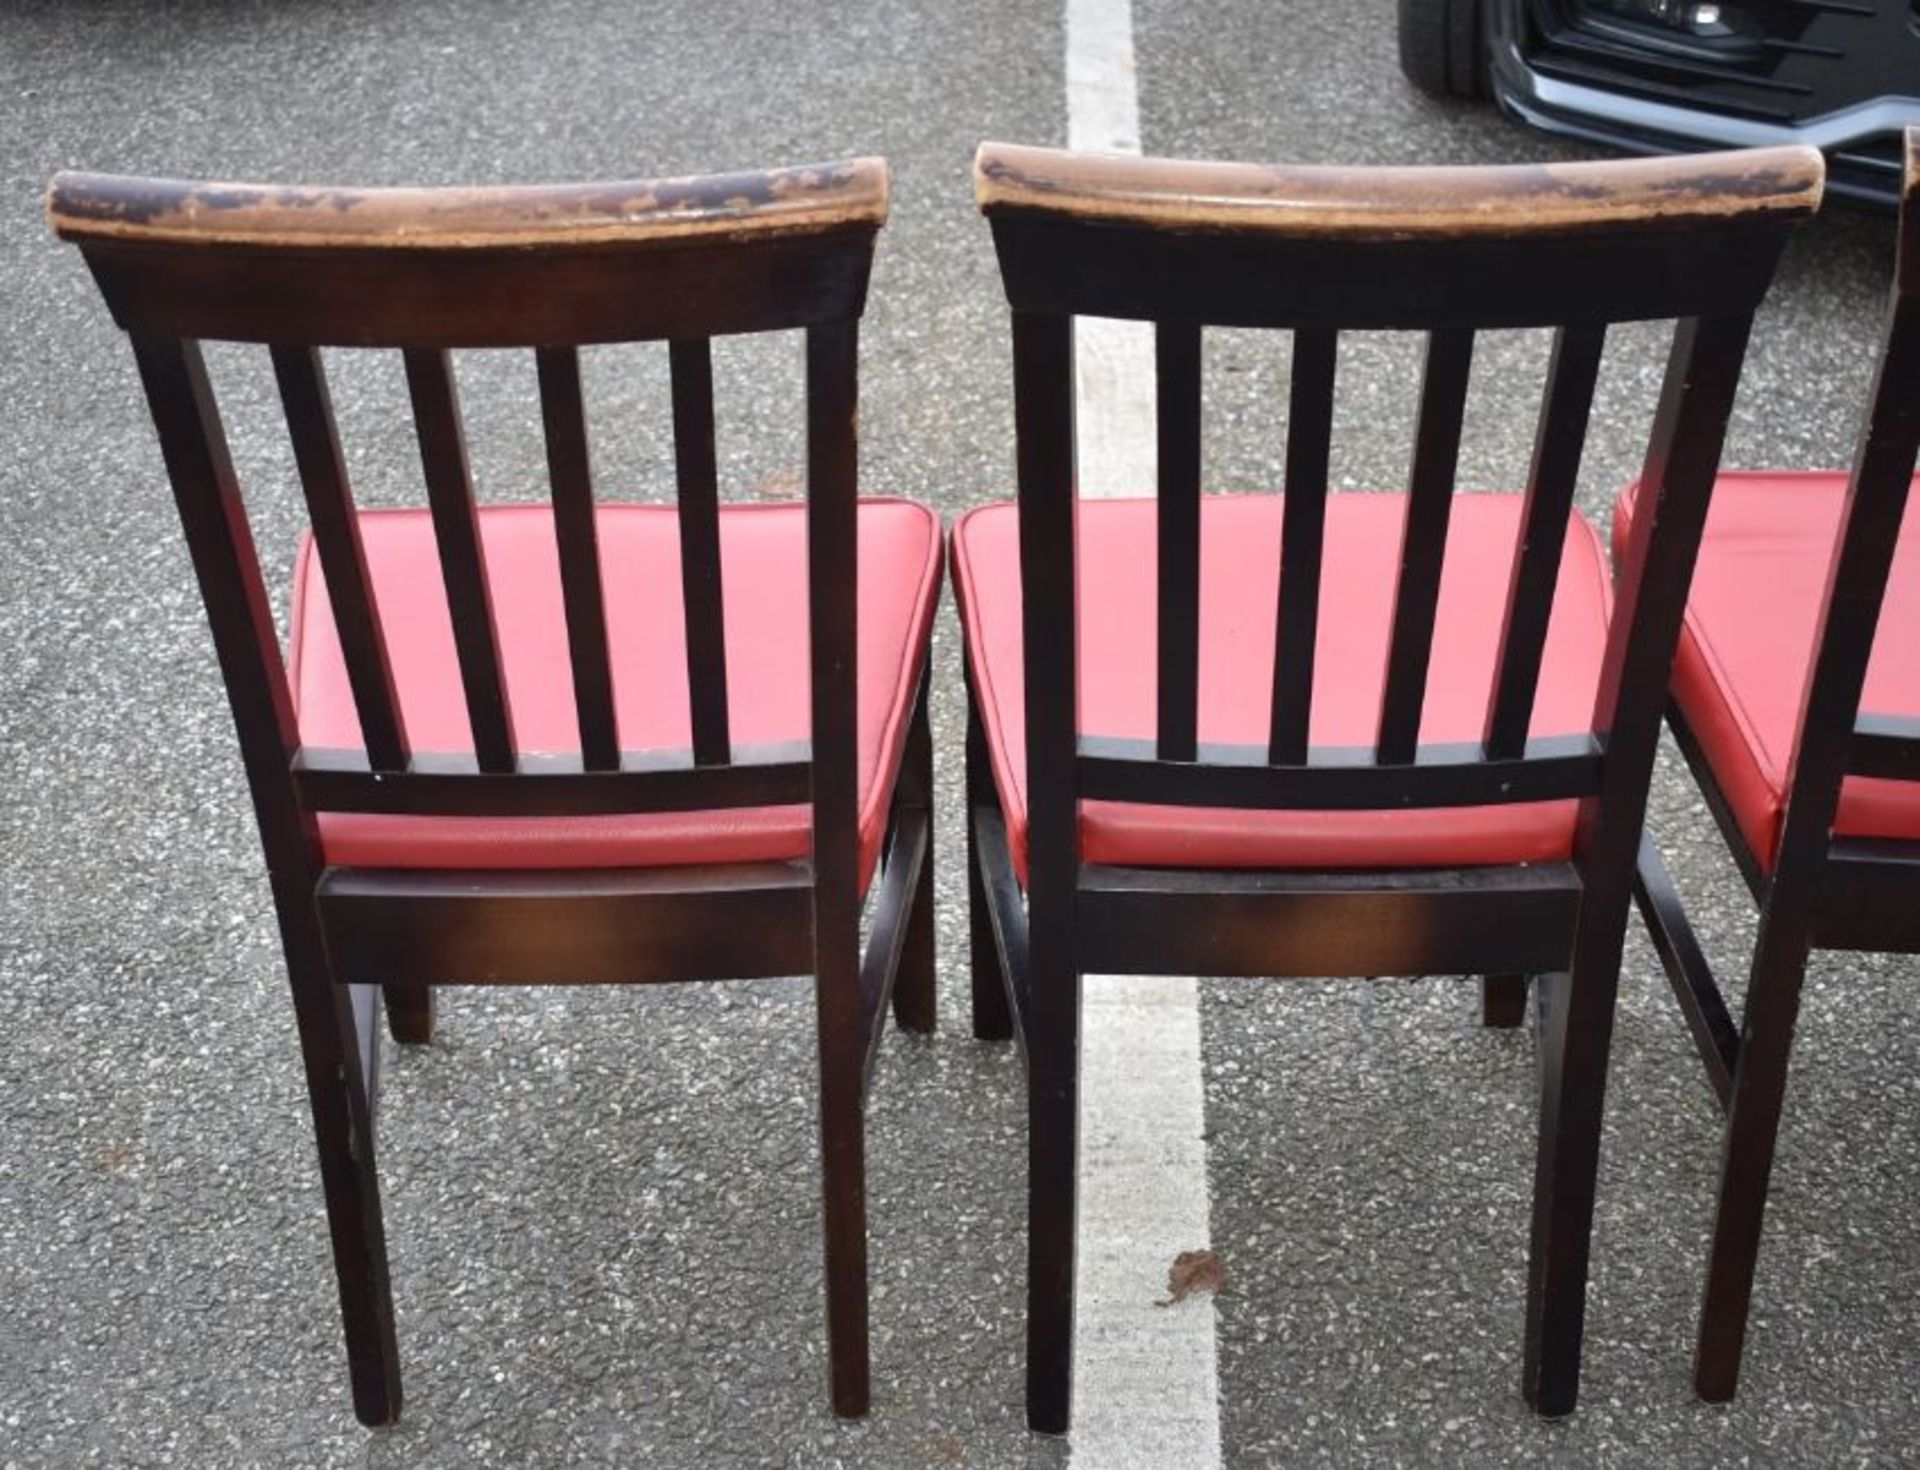 16 x Restaurant Dining Chairs With Dark Stained Wood Finish and Red Leather Seat Pads - Recently - Image 3 of 6